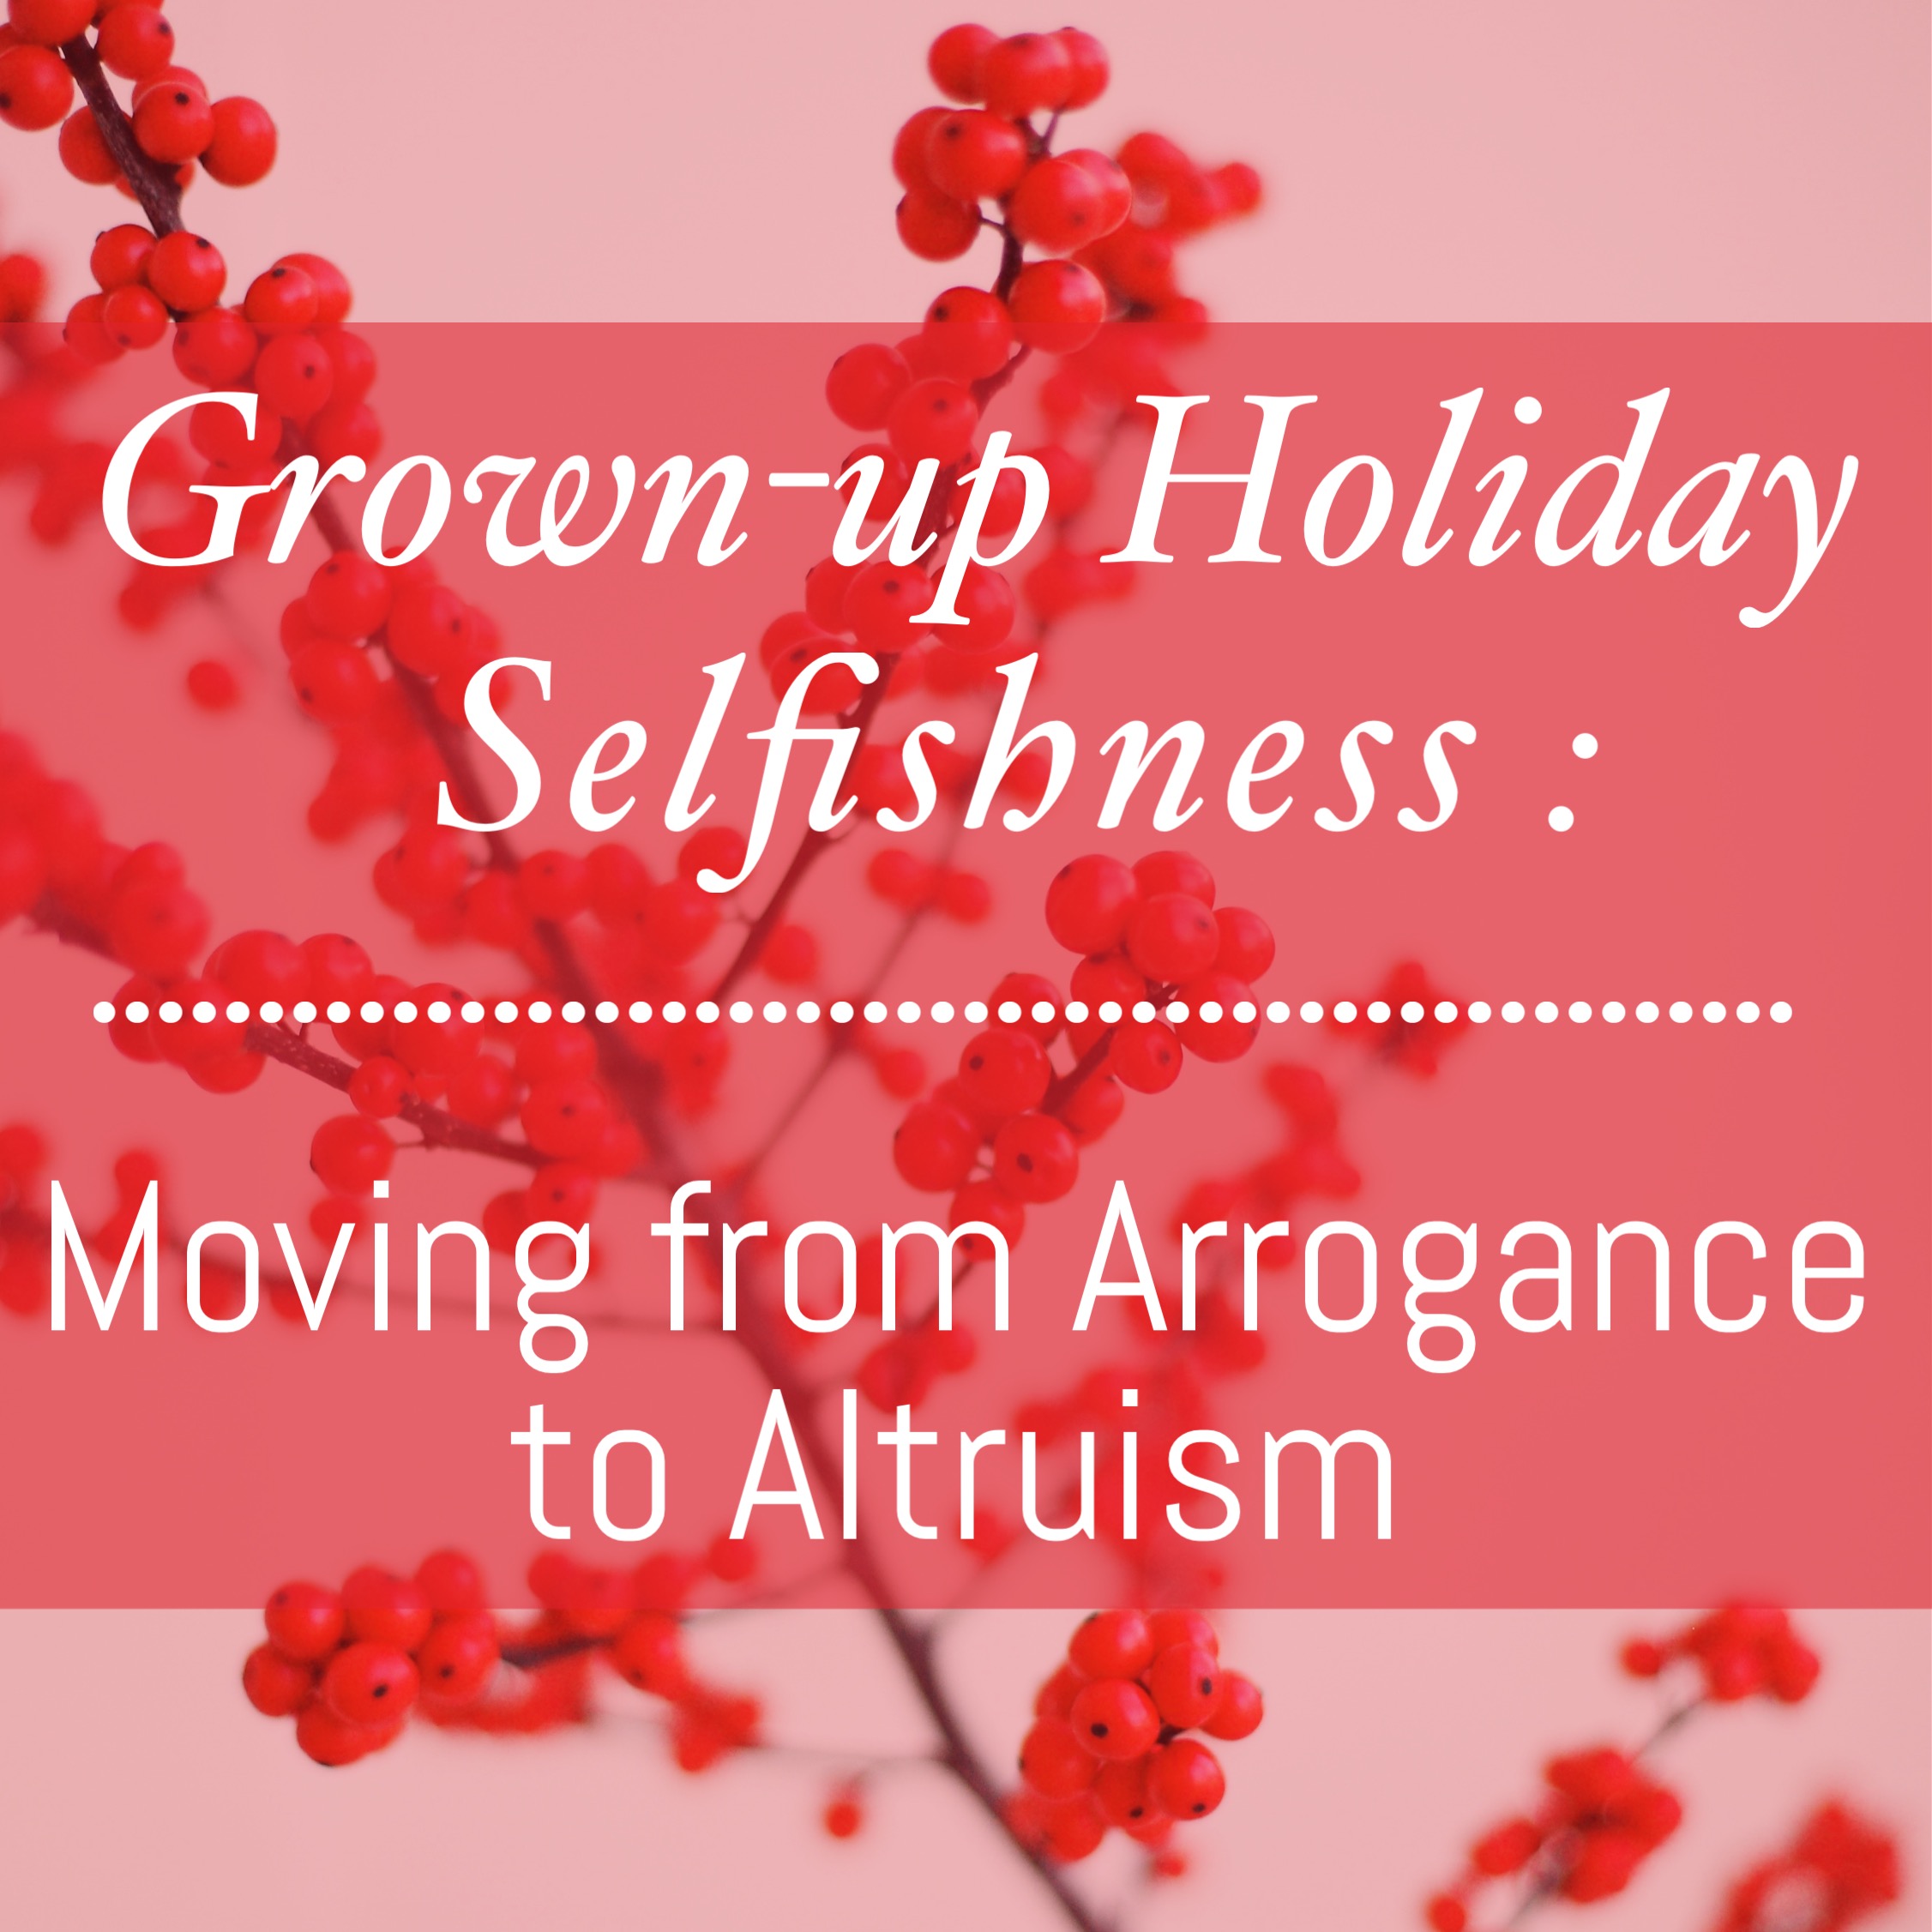 Grown-Up Holiday Selfishness Moving From Arrogance to Altruism